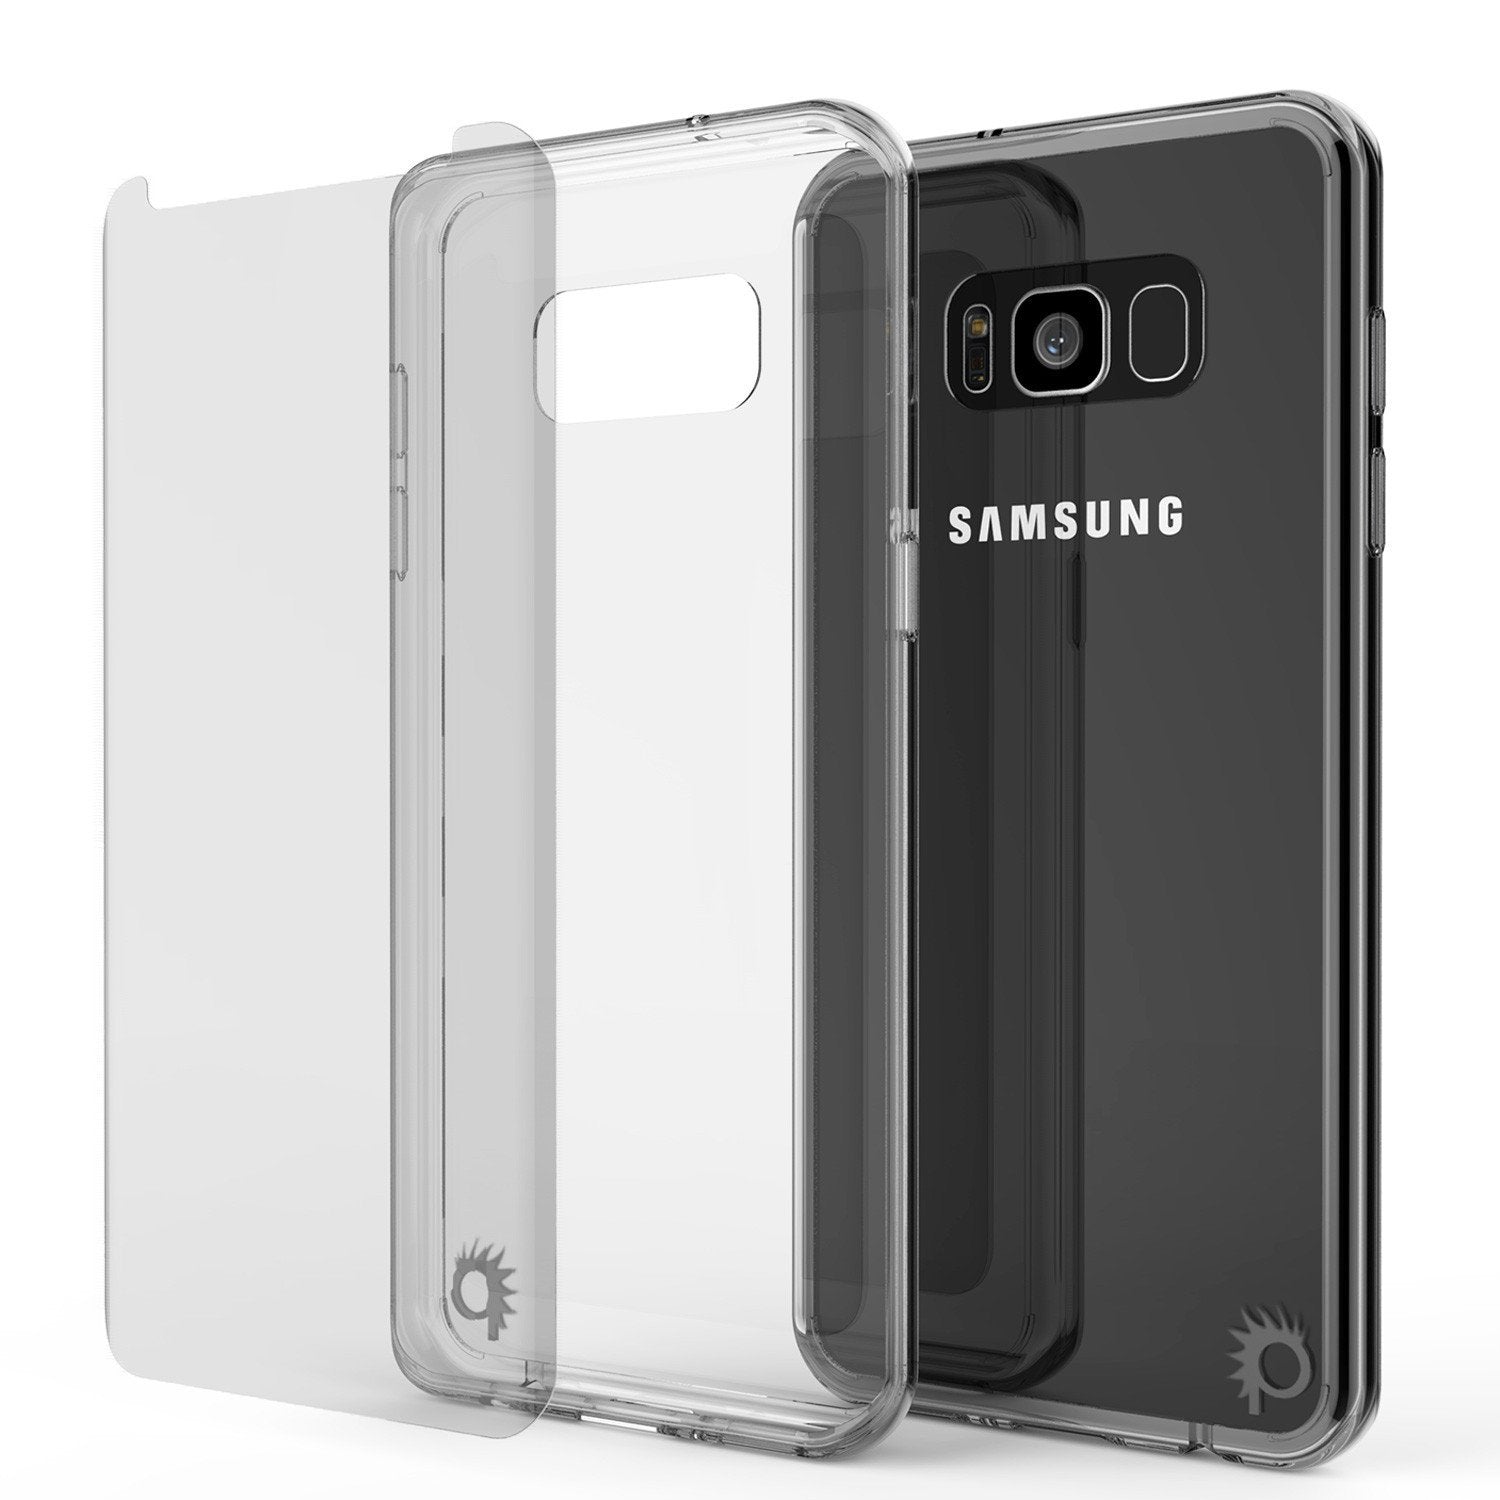 S8 Case Punkcase® LUCID 2.0 Clear Series w/ PUNK SHIELD Screen Protector | Ultra Fit - PunkCase NZ